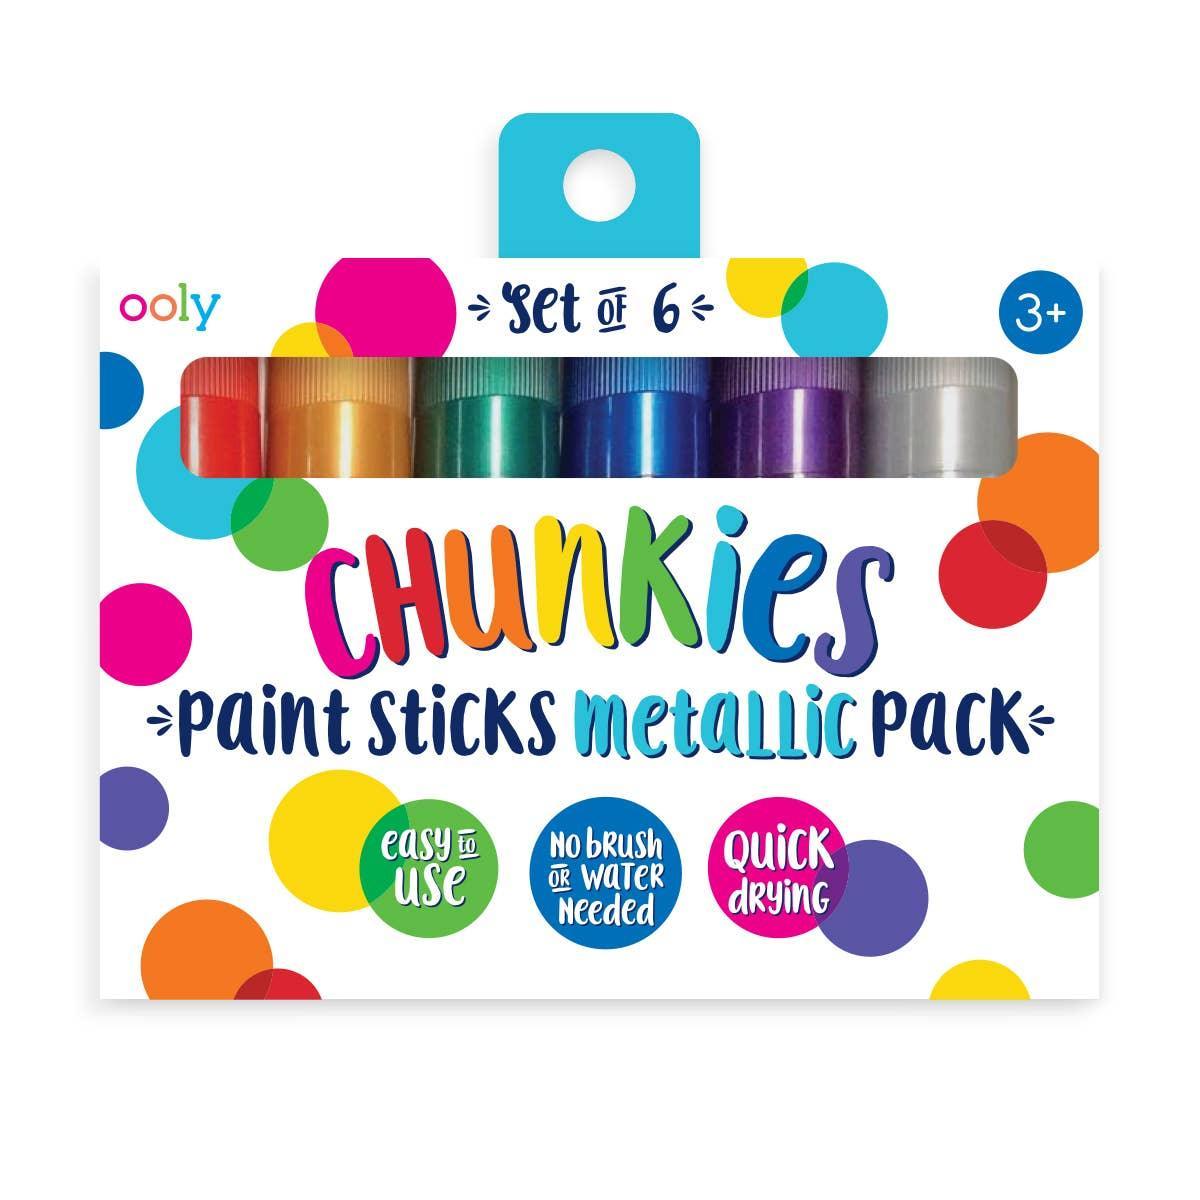 ooly Chunkies Paint Sticks Metallic - Set of 6 - Why and Whale